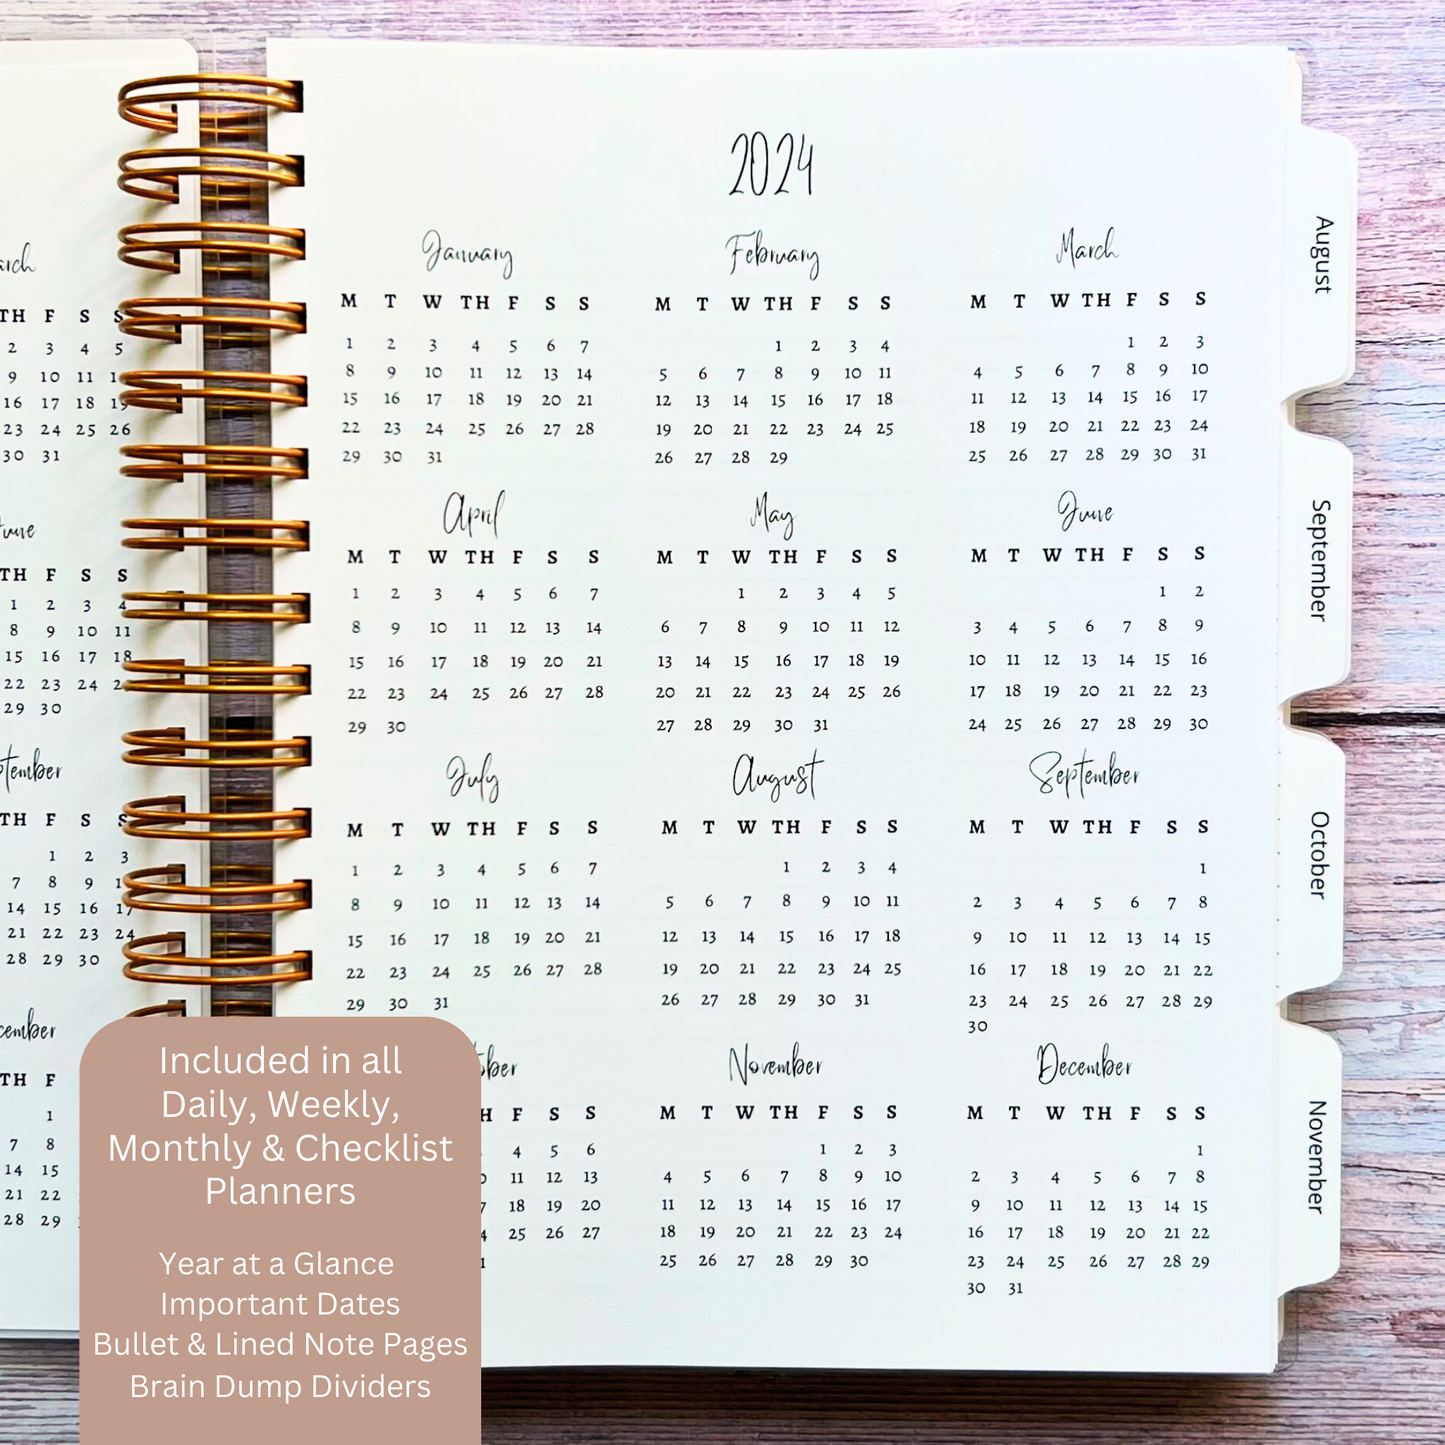 Personalized Monthly Planner - Live for Yourself